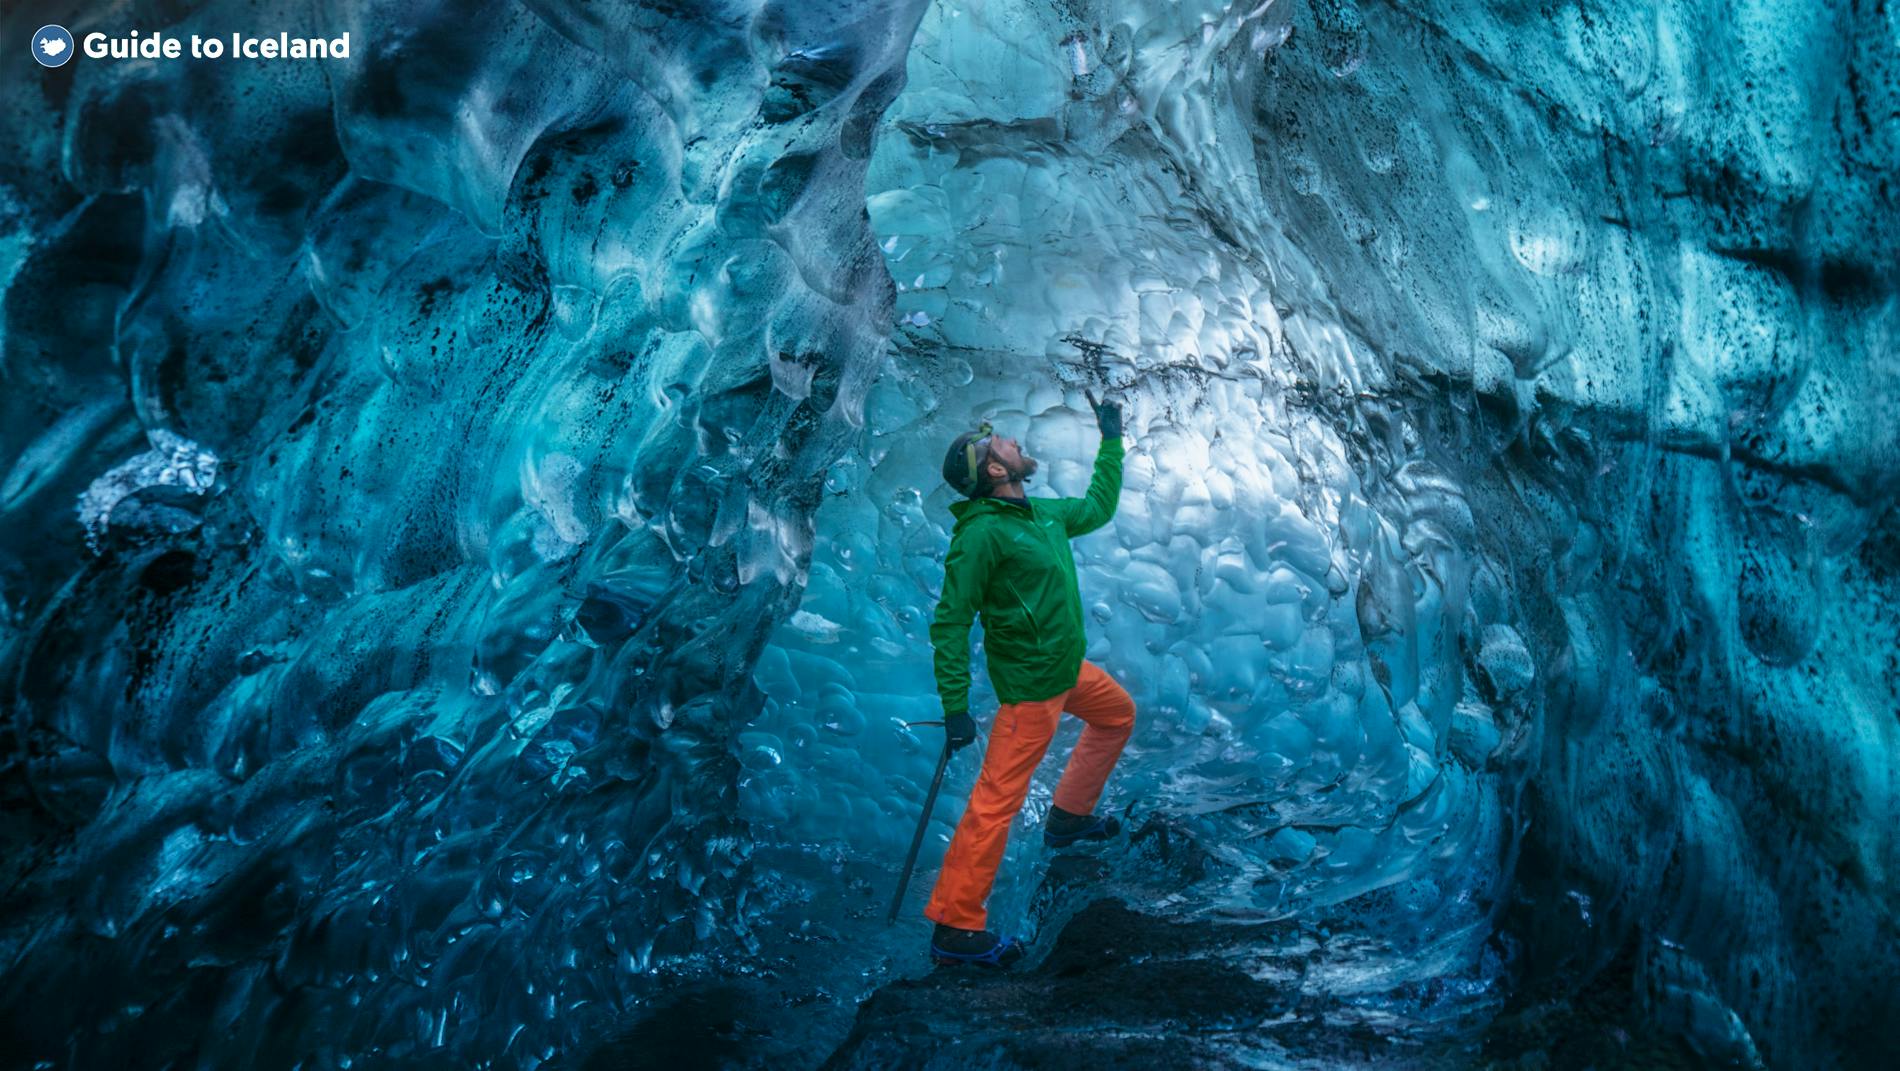 A visitor marvelling at the colours from the inside of an ice cave in Iceland.